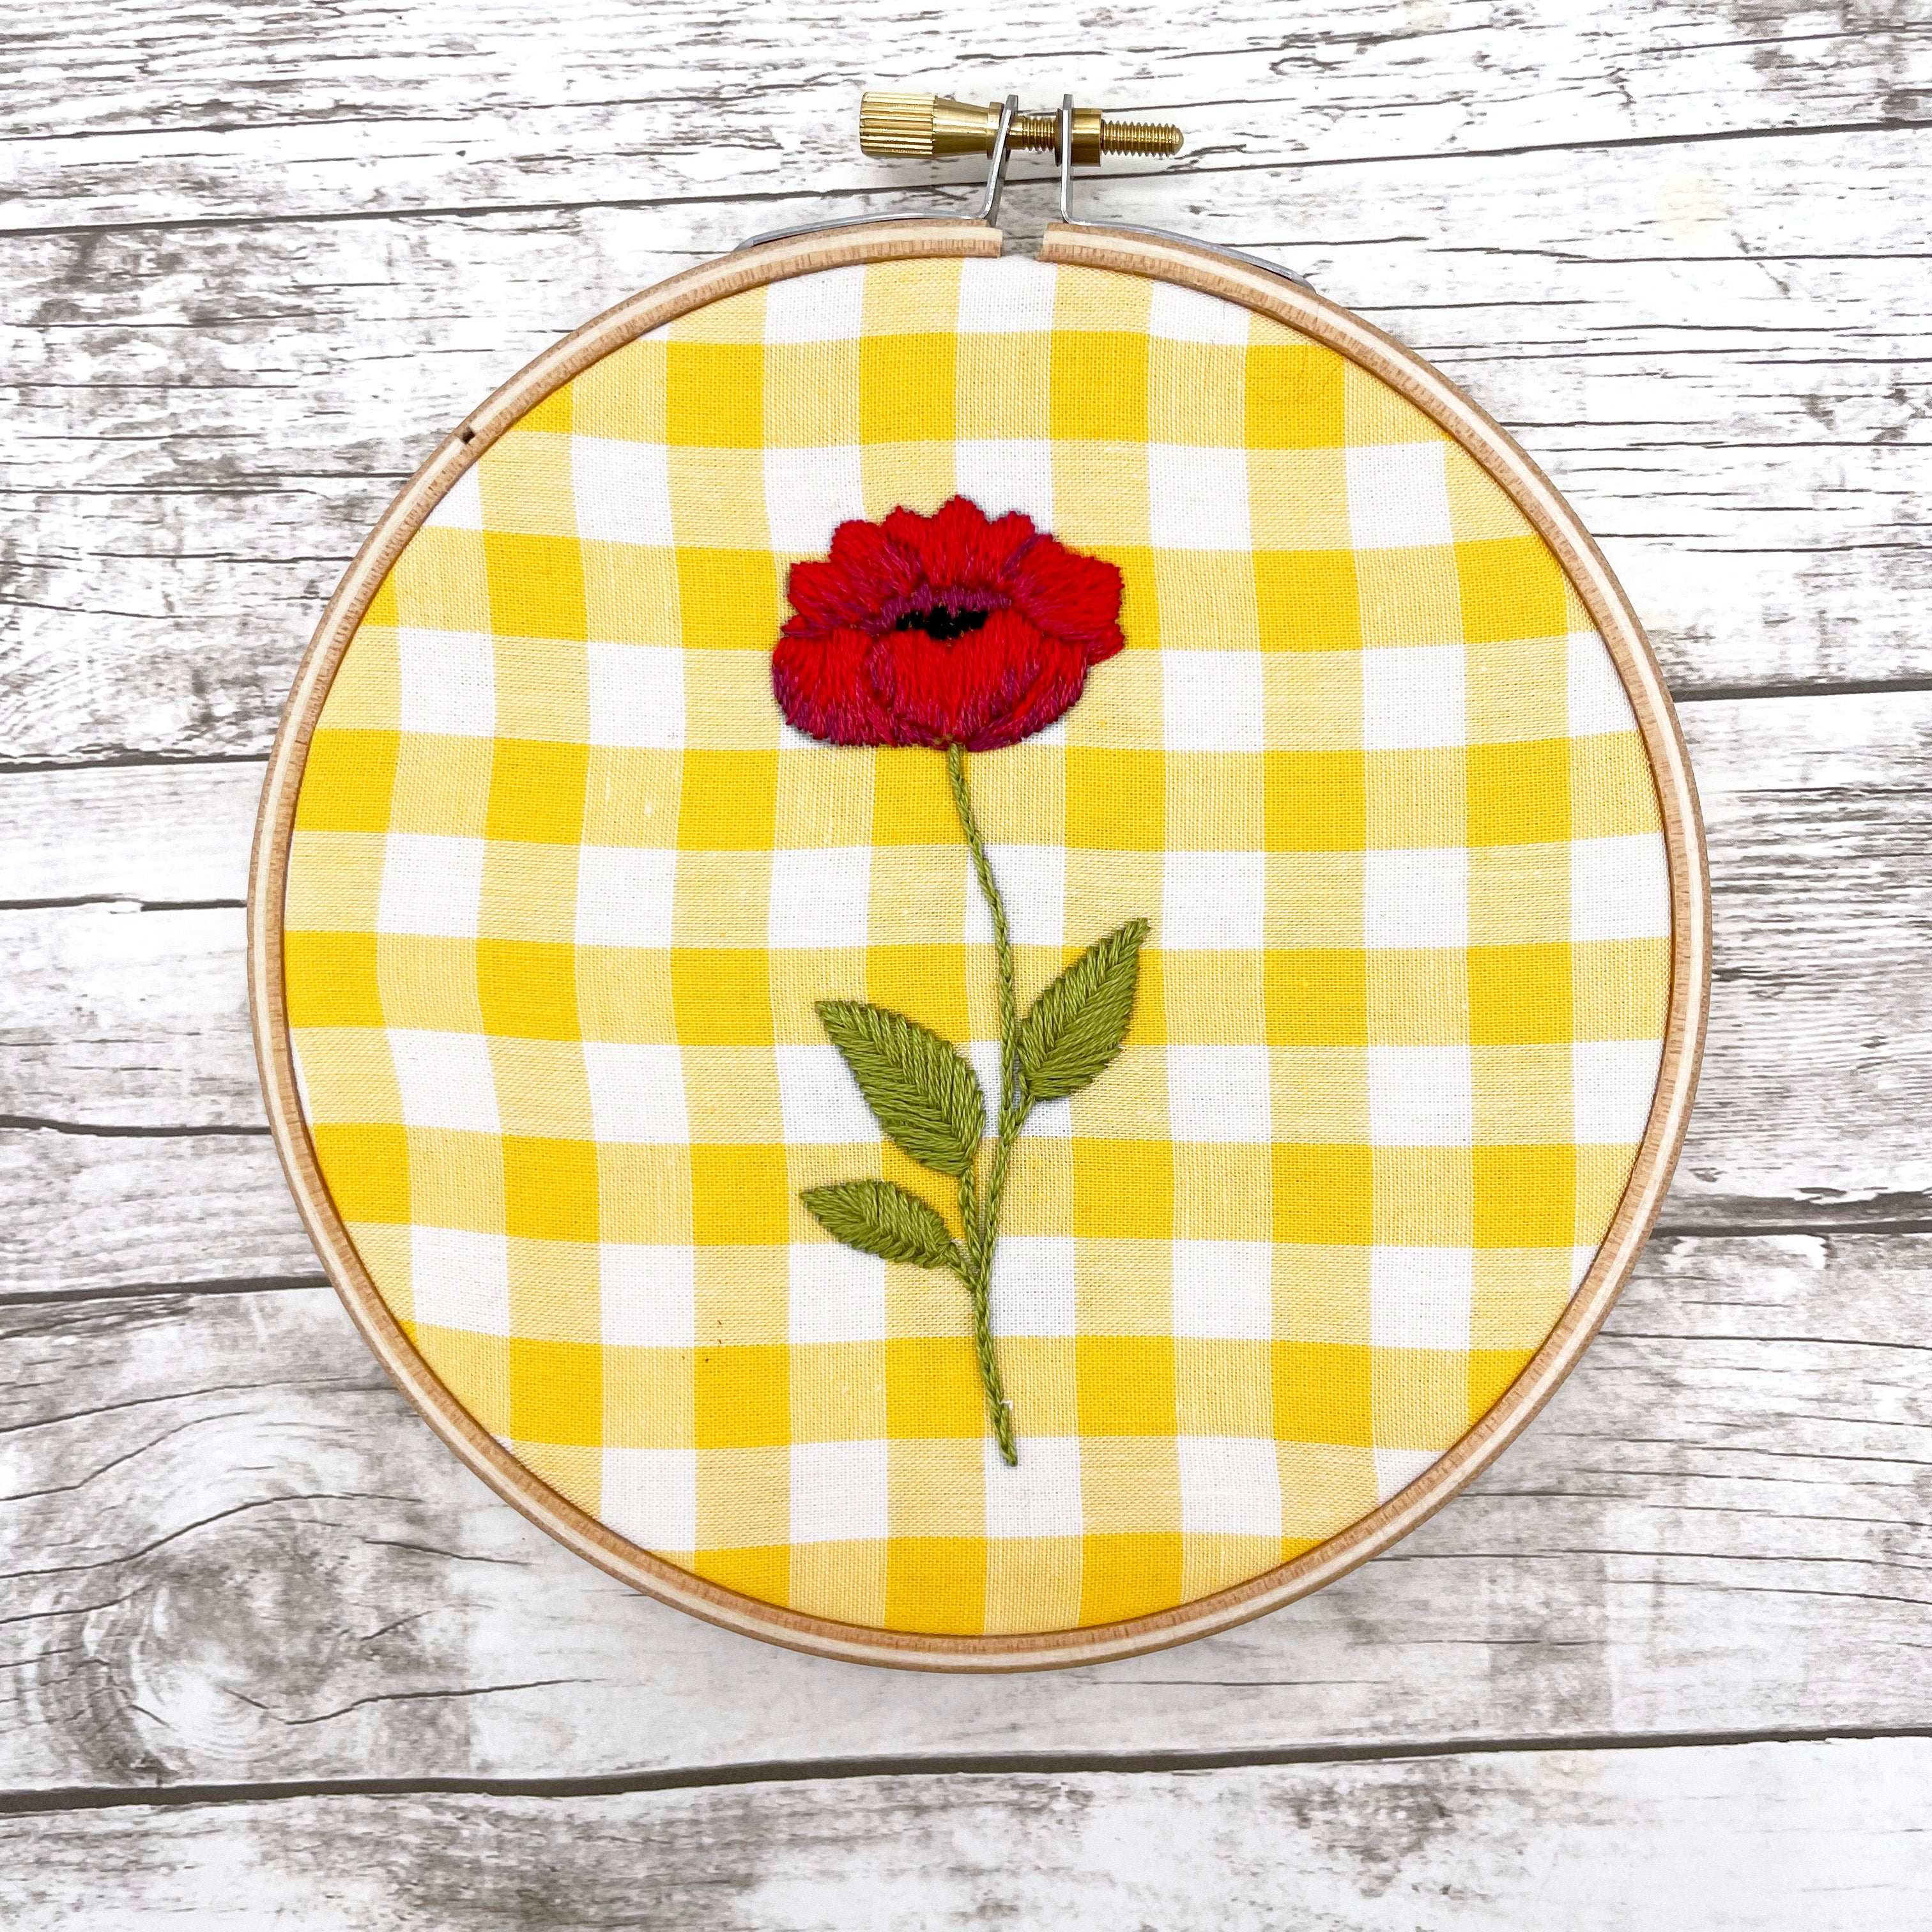 In Bloom: Floral Embroidery Patterns (iron-on transfers) – Lazy